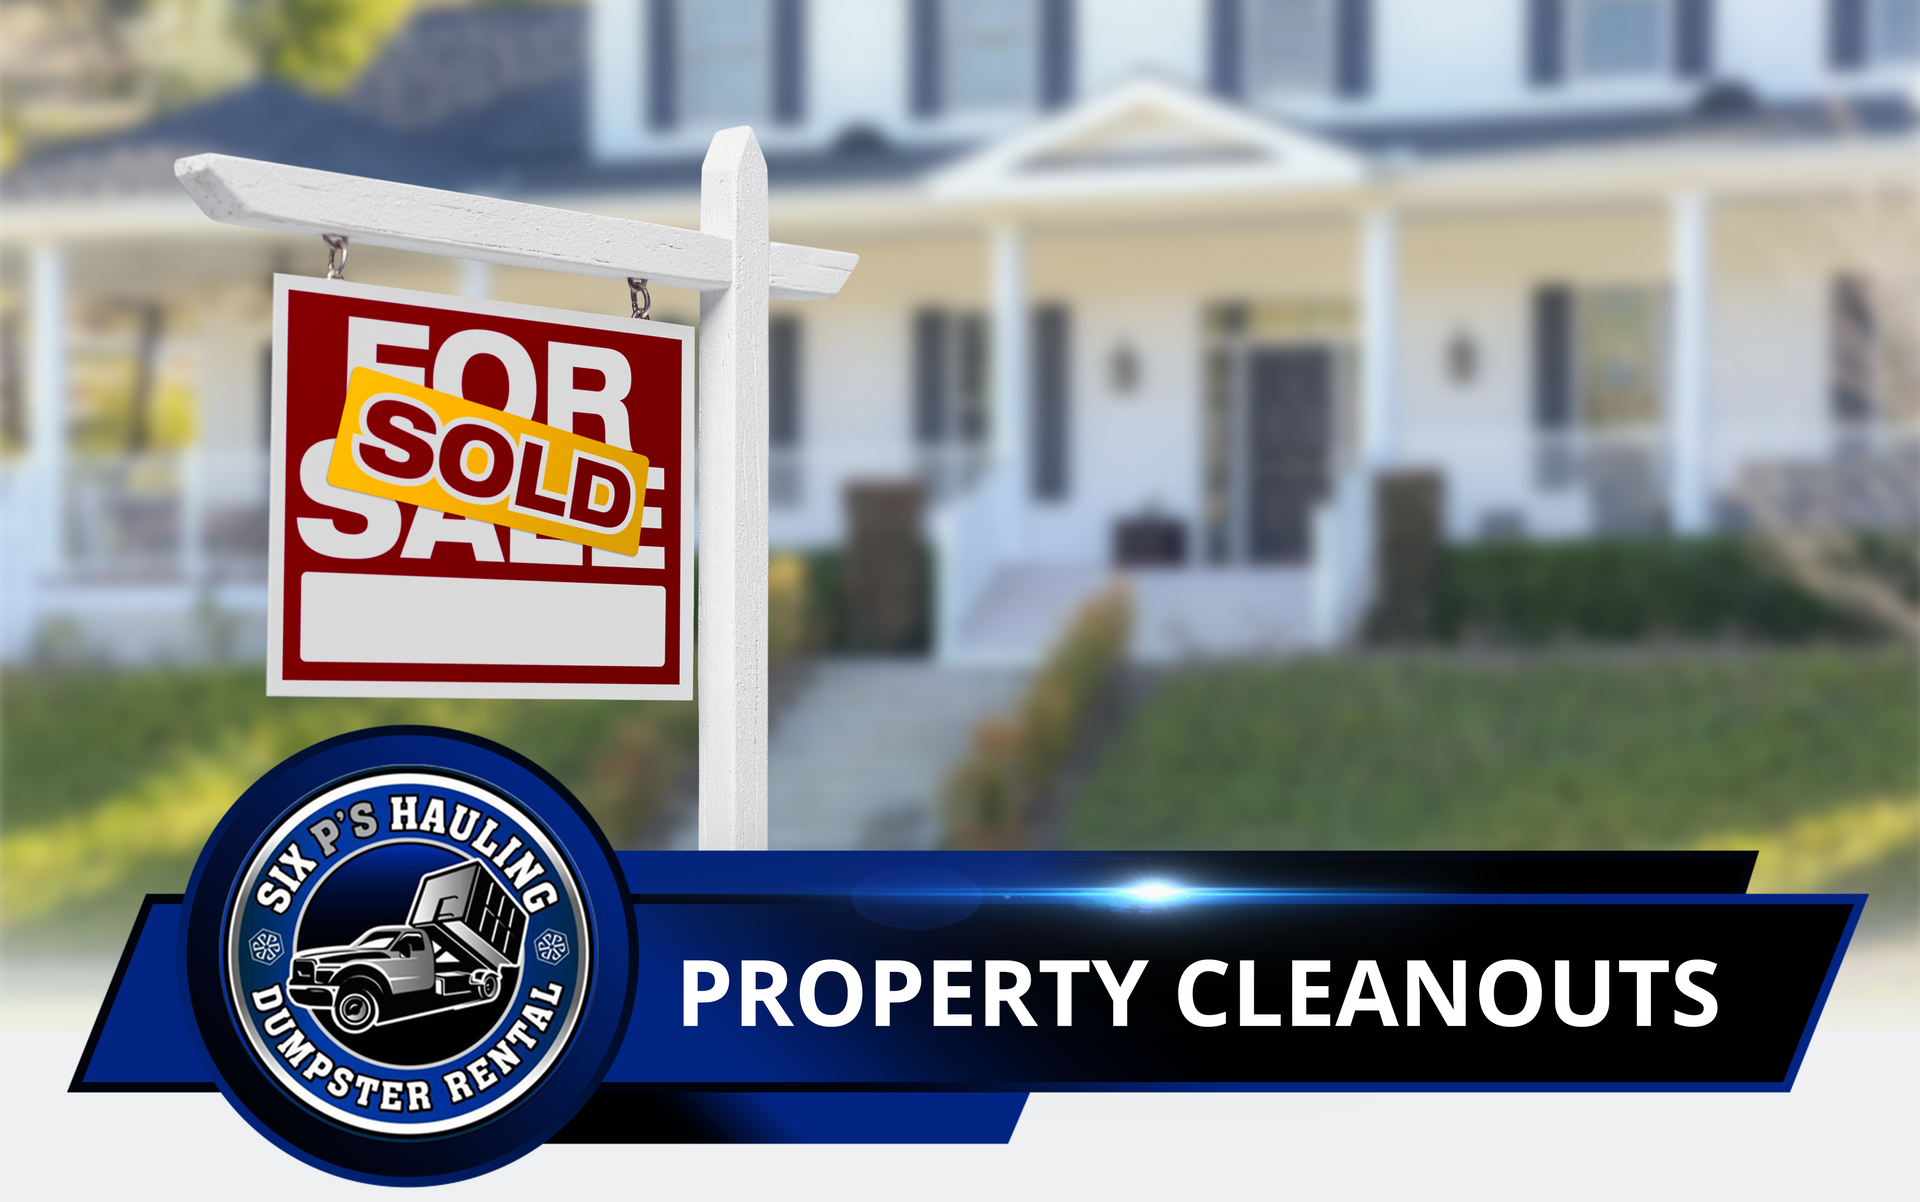 Property Cleanouts in Claremont, CA